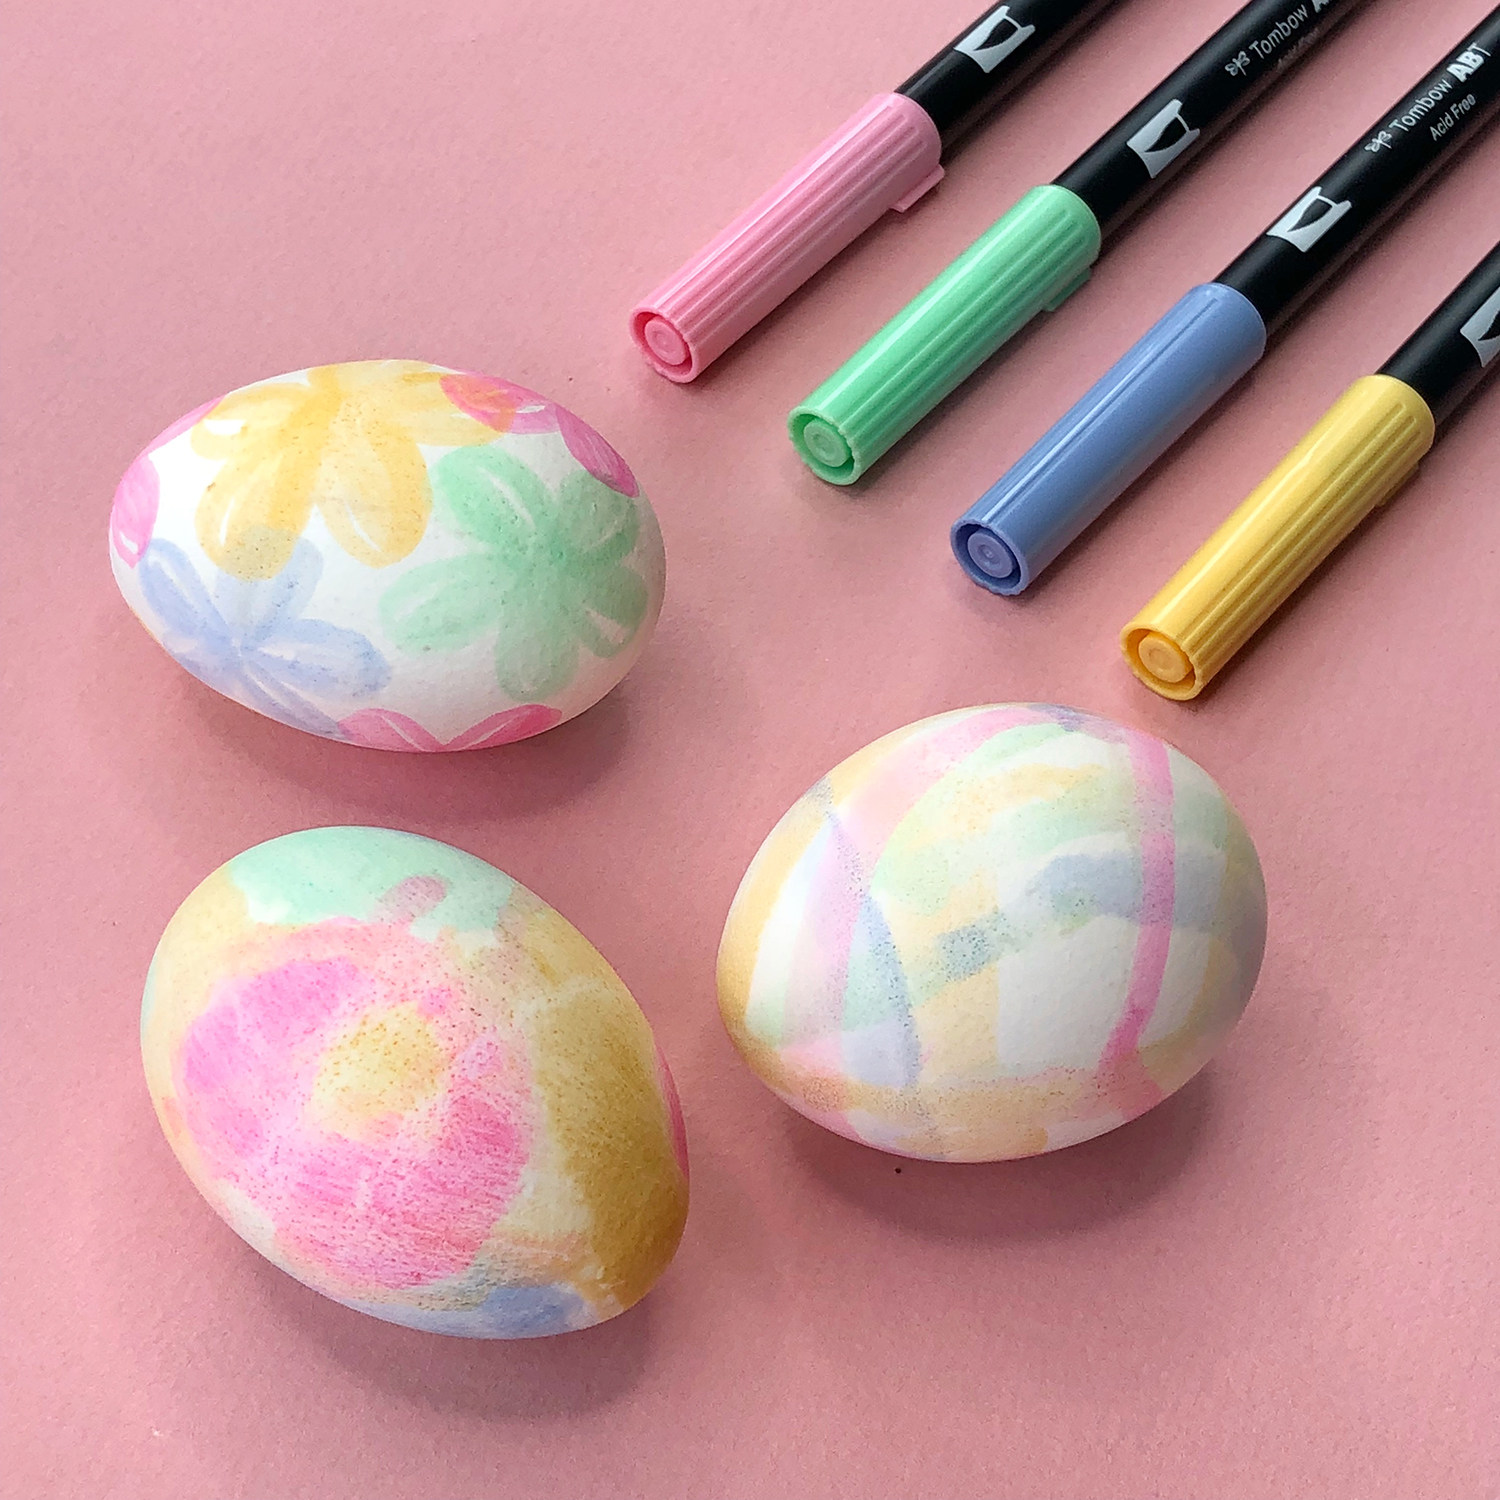 3 Watercolor-Look Easter Egg Decorating Techniques Using Tombow Dual Brush Pens by Jessica of BrownPaperBunny